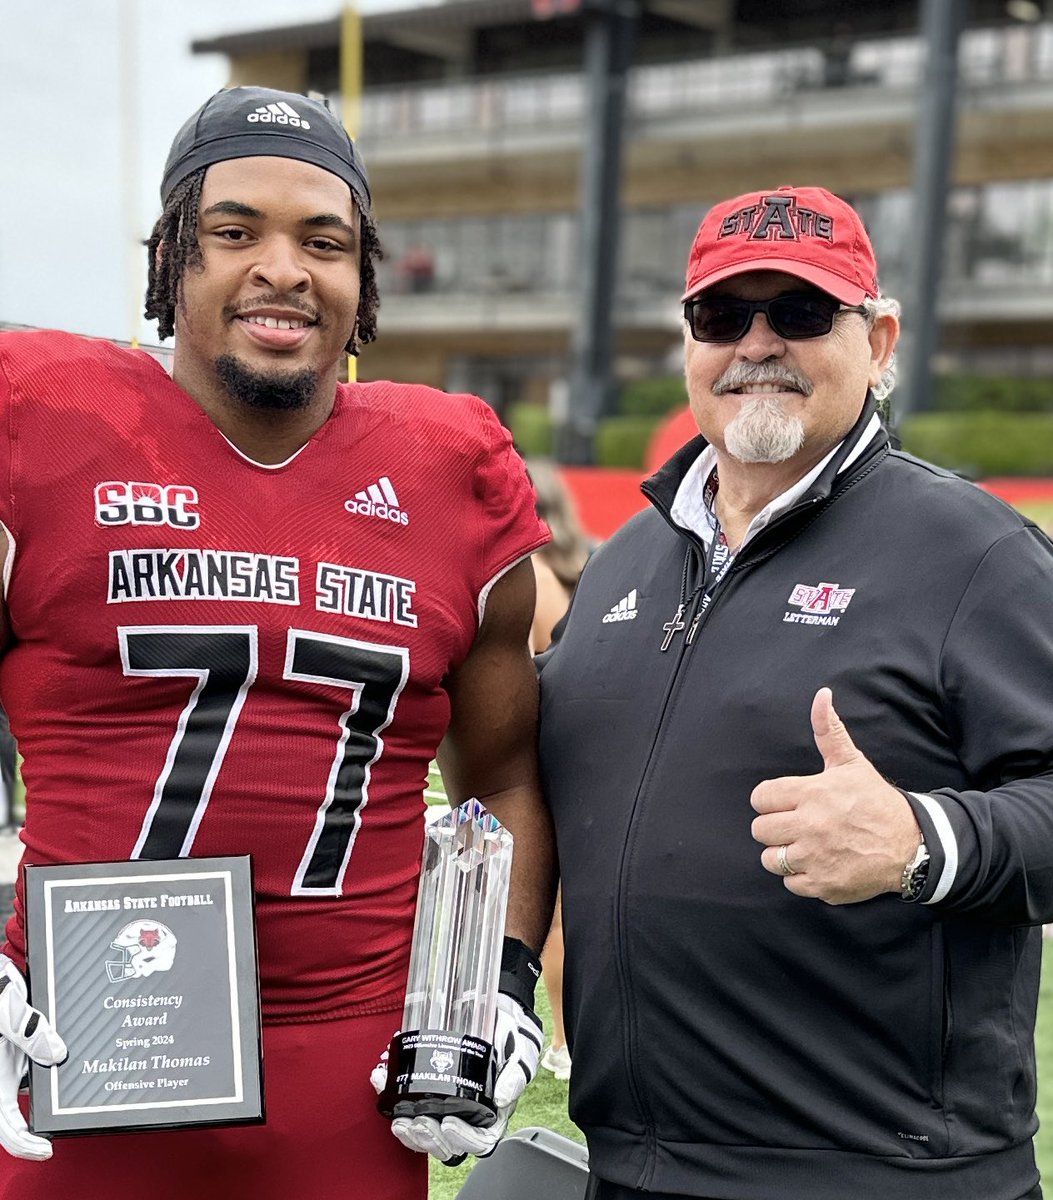 Breaking news: Makilan Thomas has been named the Arkansas State Football Gary Withrow Award (Offensive Lineman of the Year) for the 2023 season! @AStateFB @lrtigerfootball